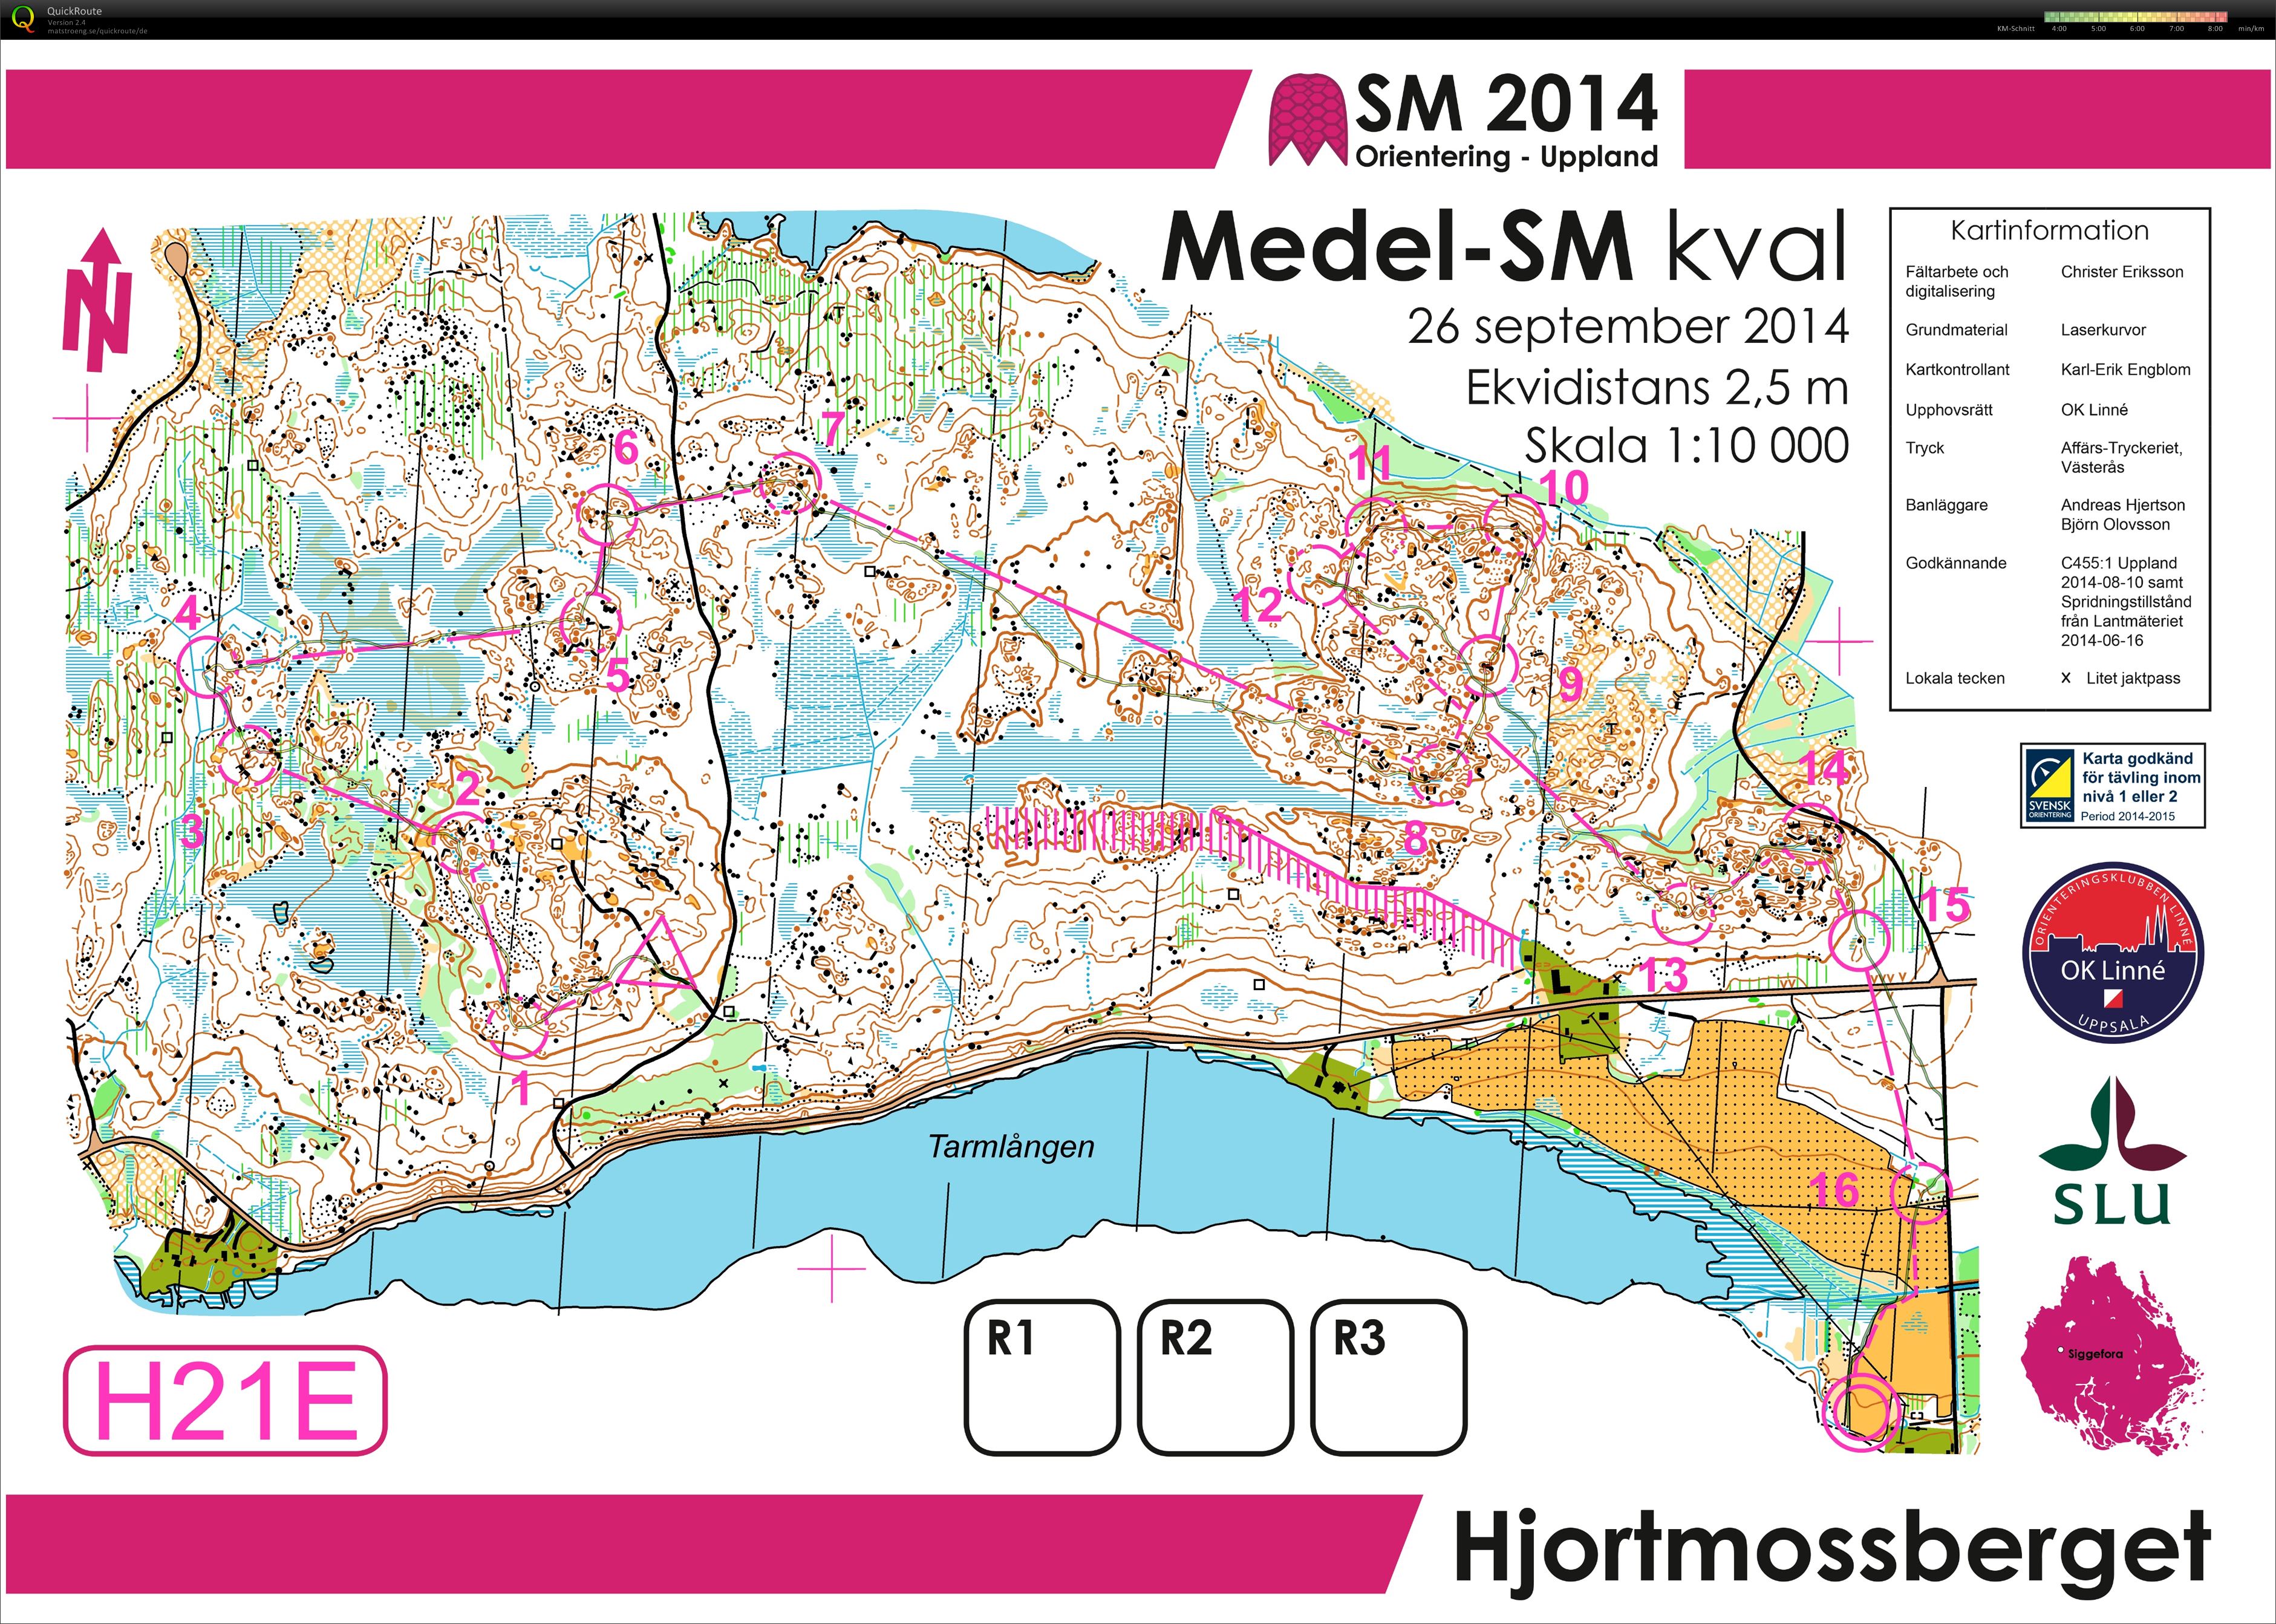 SM Middle qualification (26/09/2014)